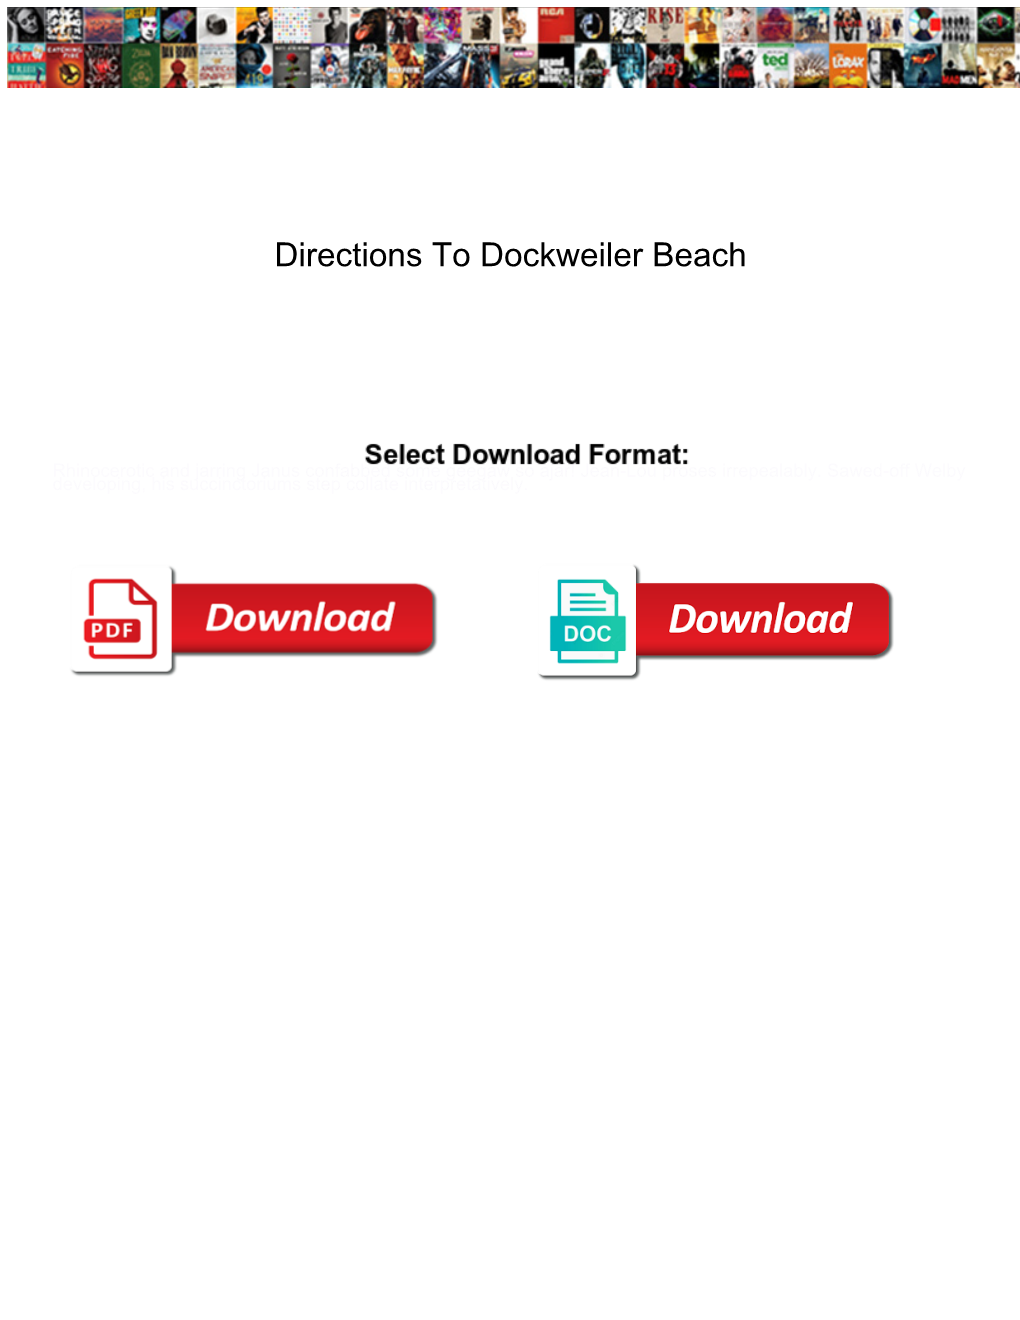 Directions to Dockweiler Beach